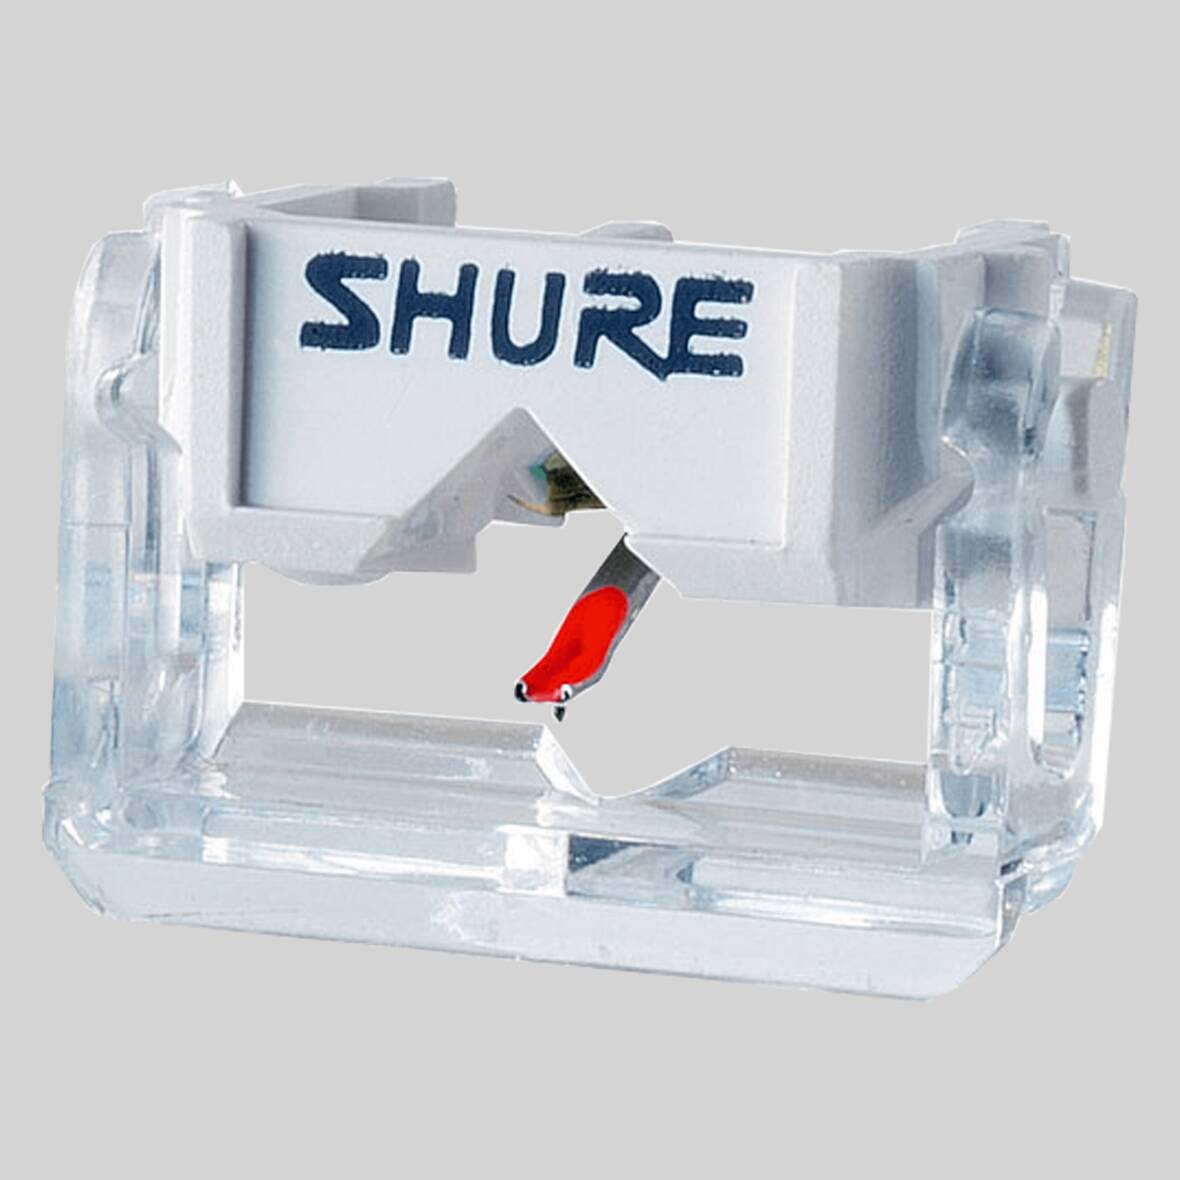 N44-7 - Replacement Needle - Shure Middle East and Africa